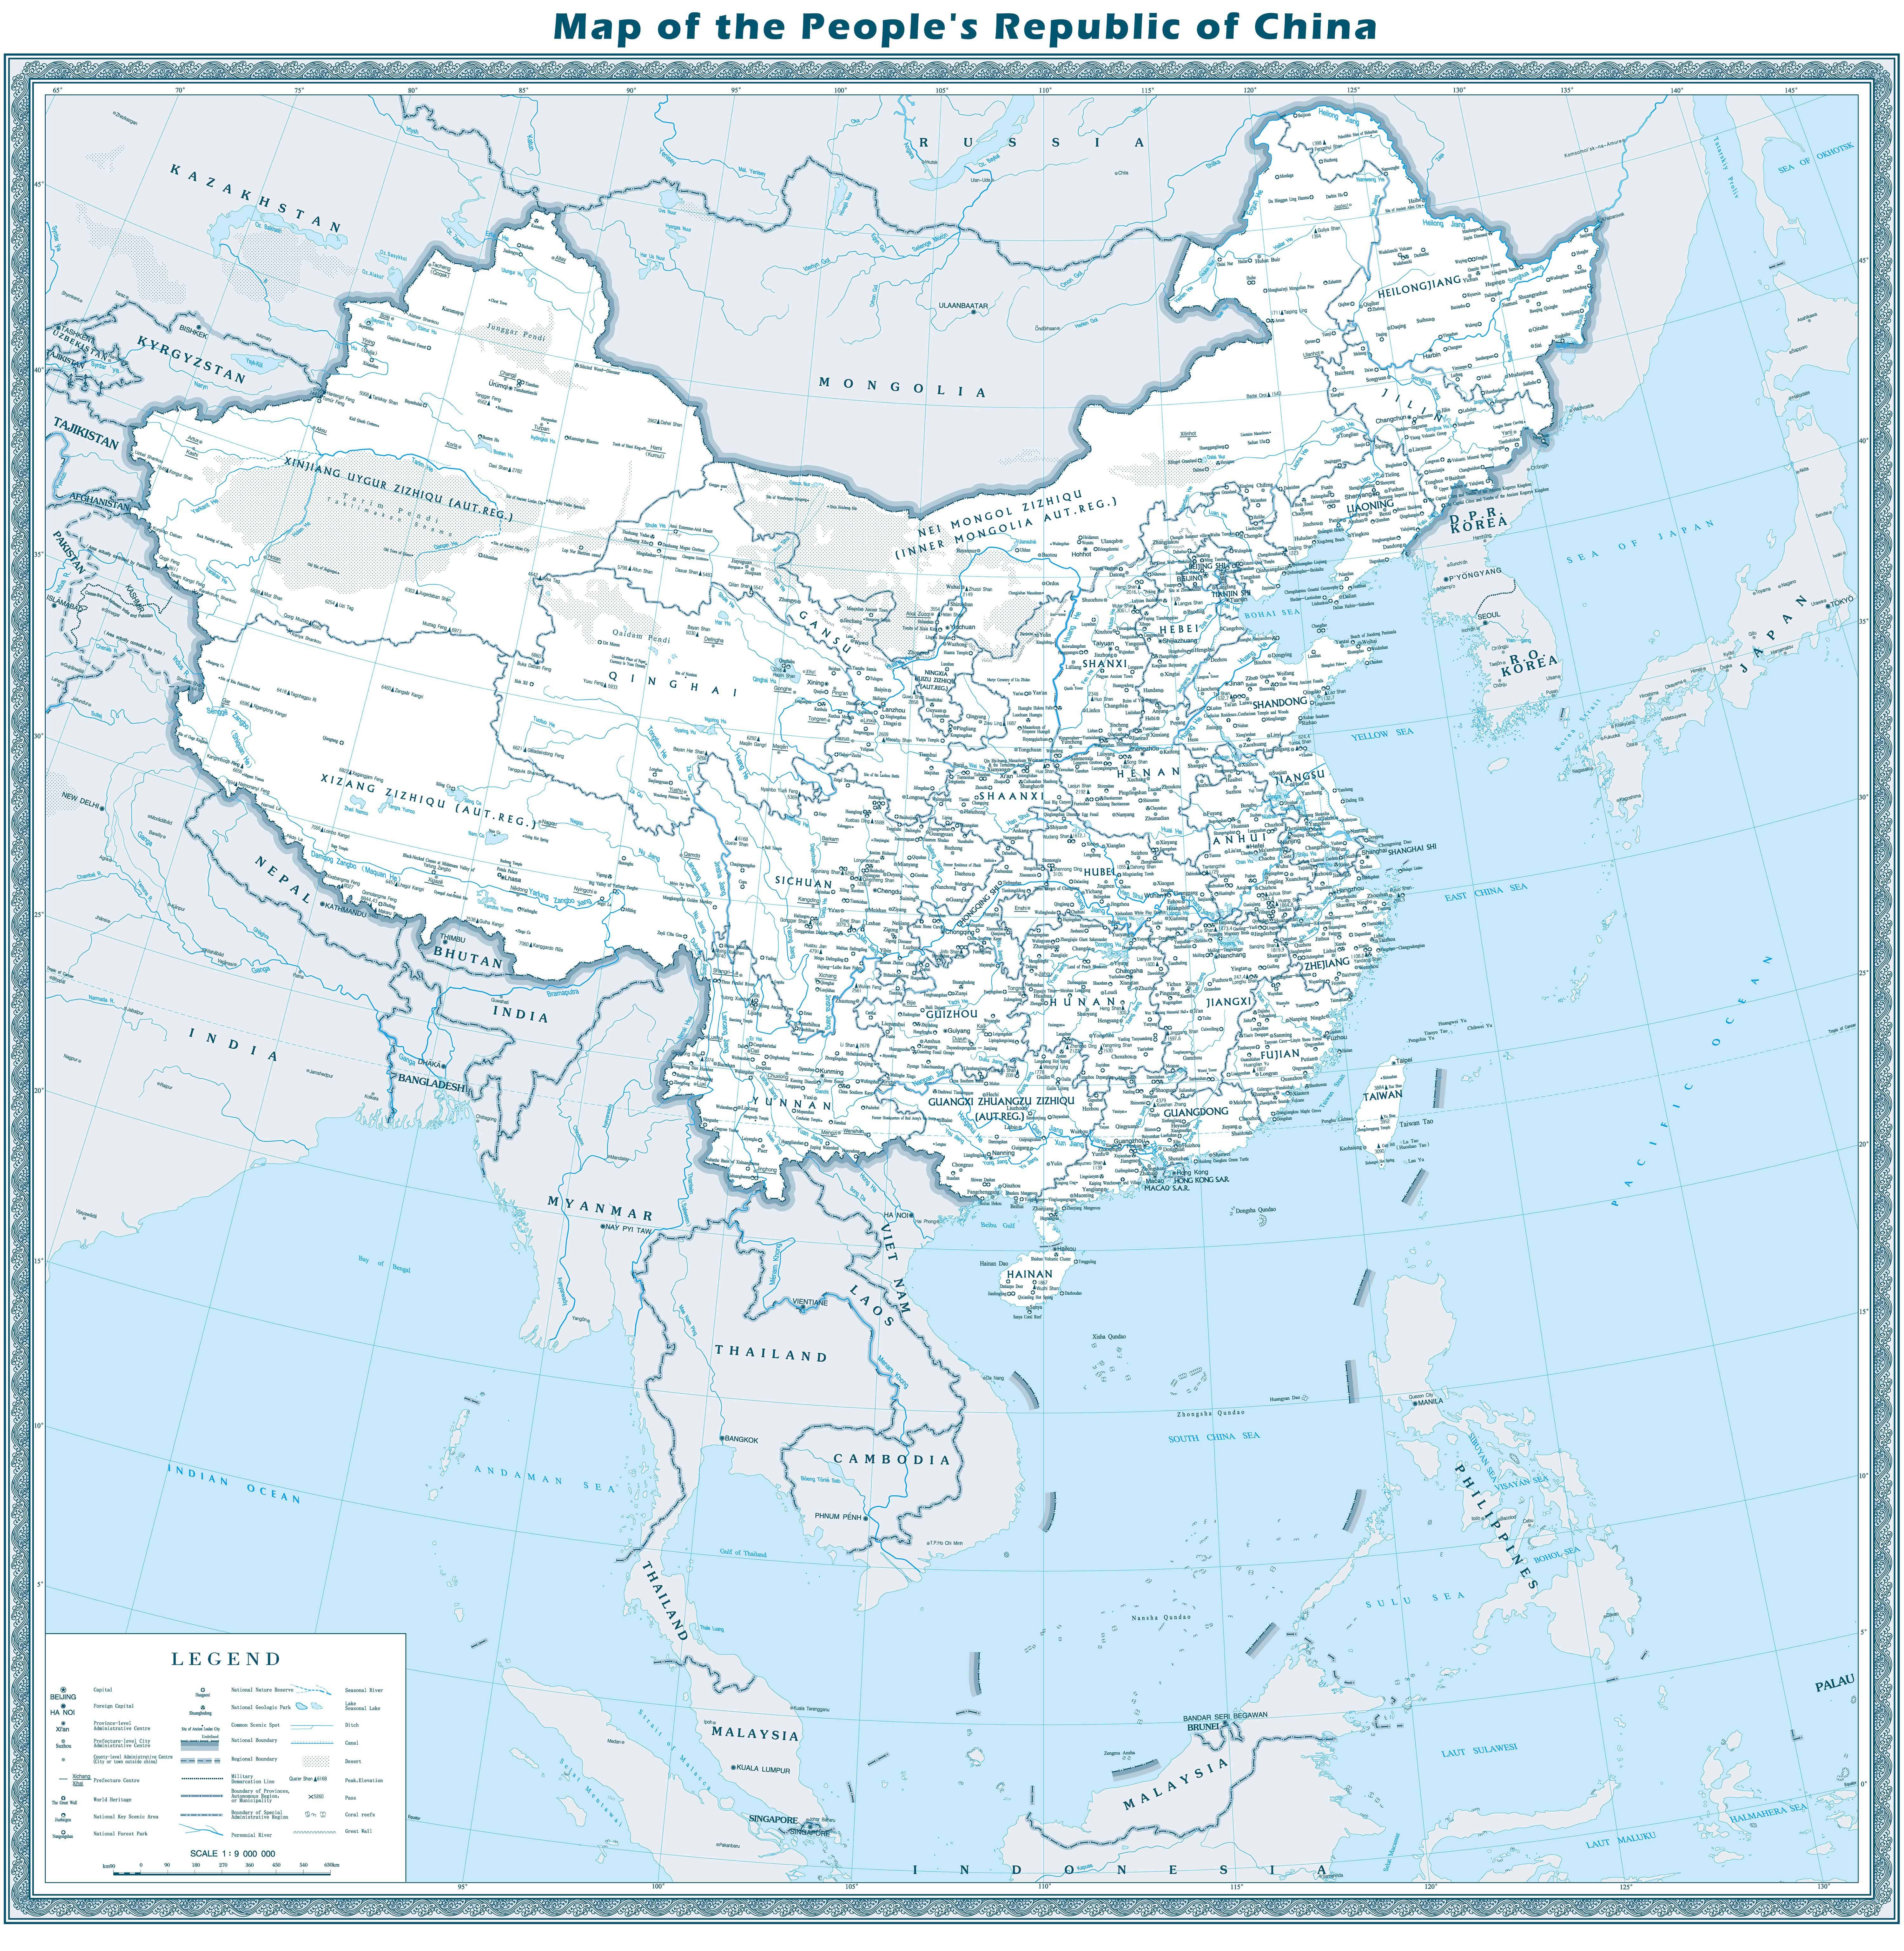 China Map Provinces And Cities Map of China: Maps of City and Province   TravelChinaGuide.com